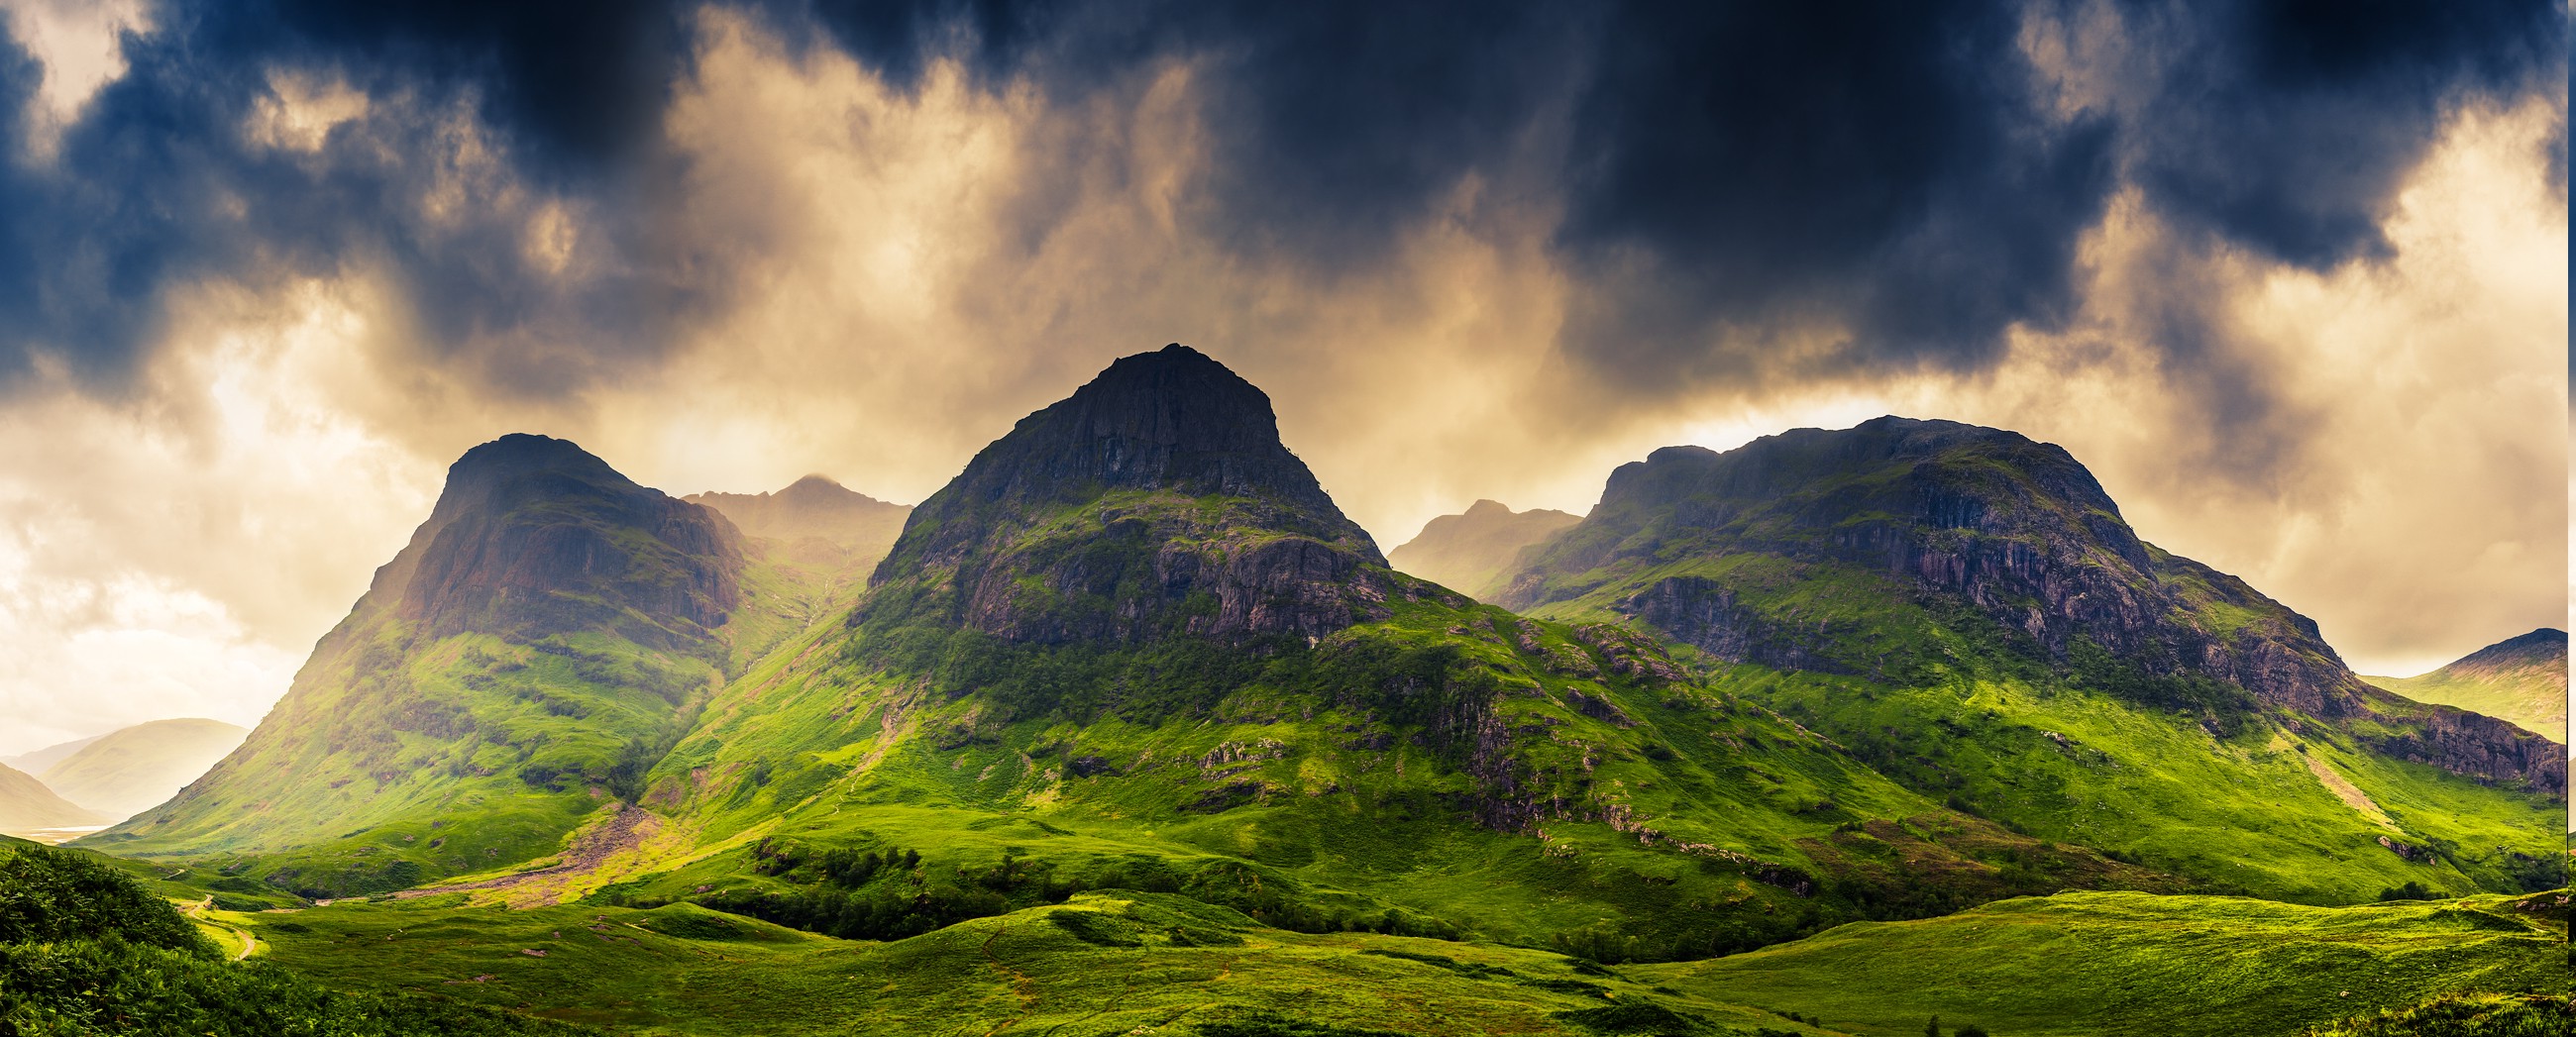 Mountain clouds grass scotland spring nature landscape uk wallpapers hd desktop and mobile backgrounds